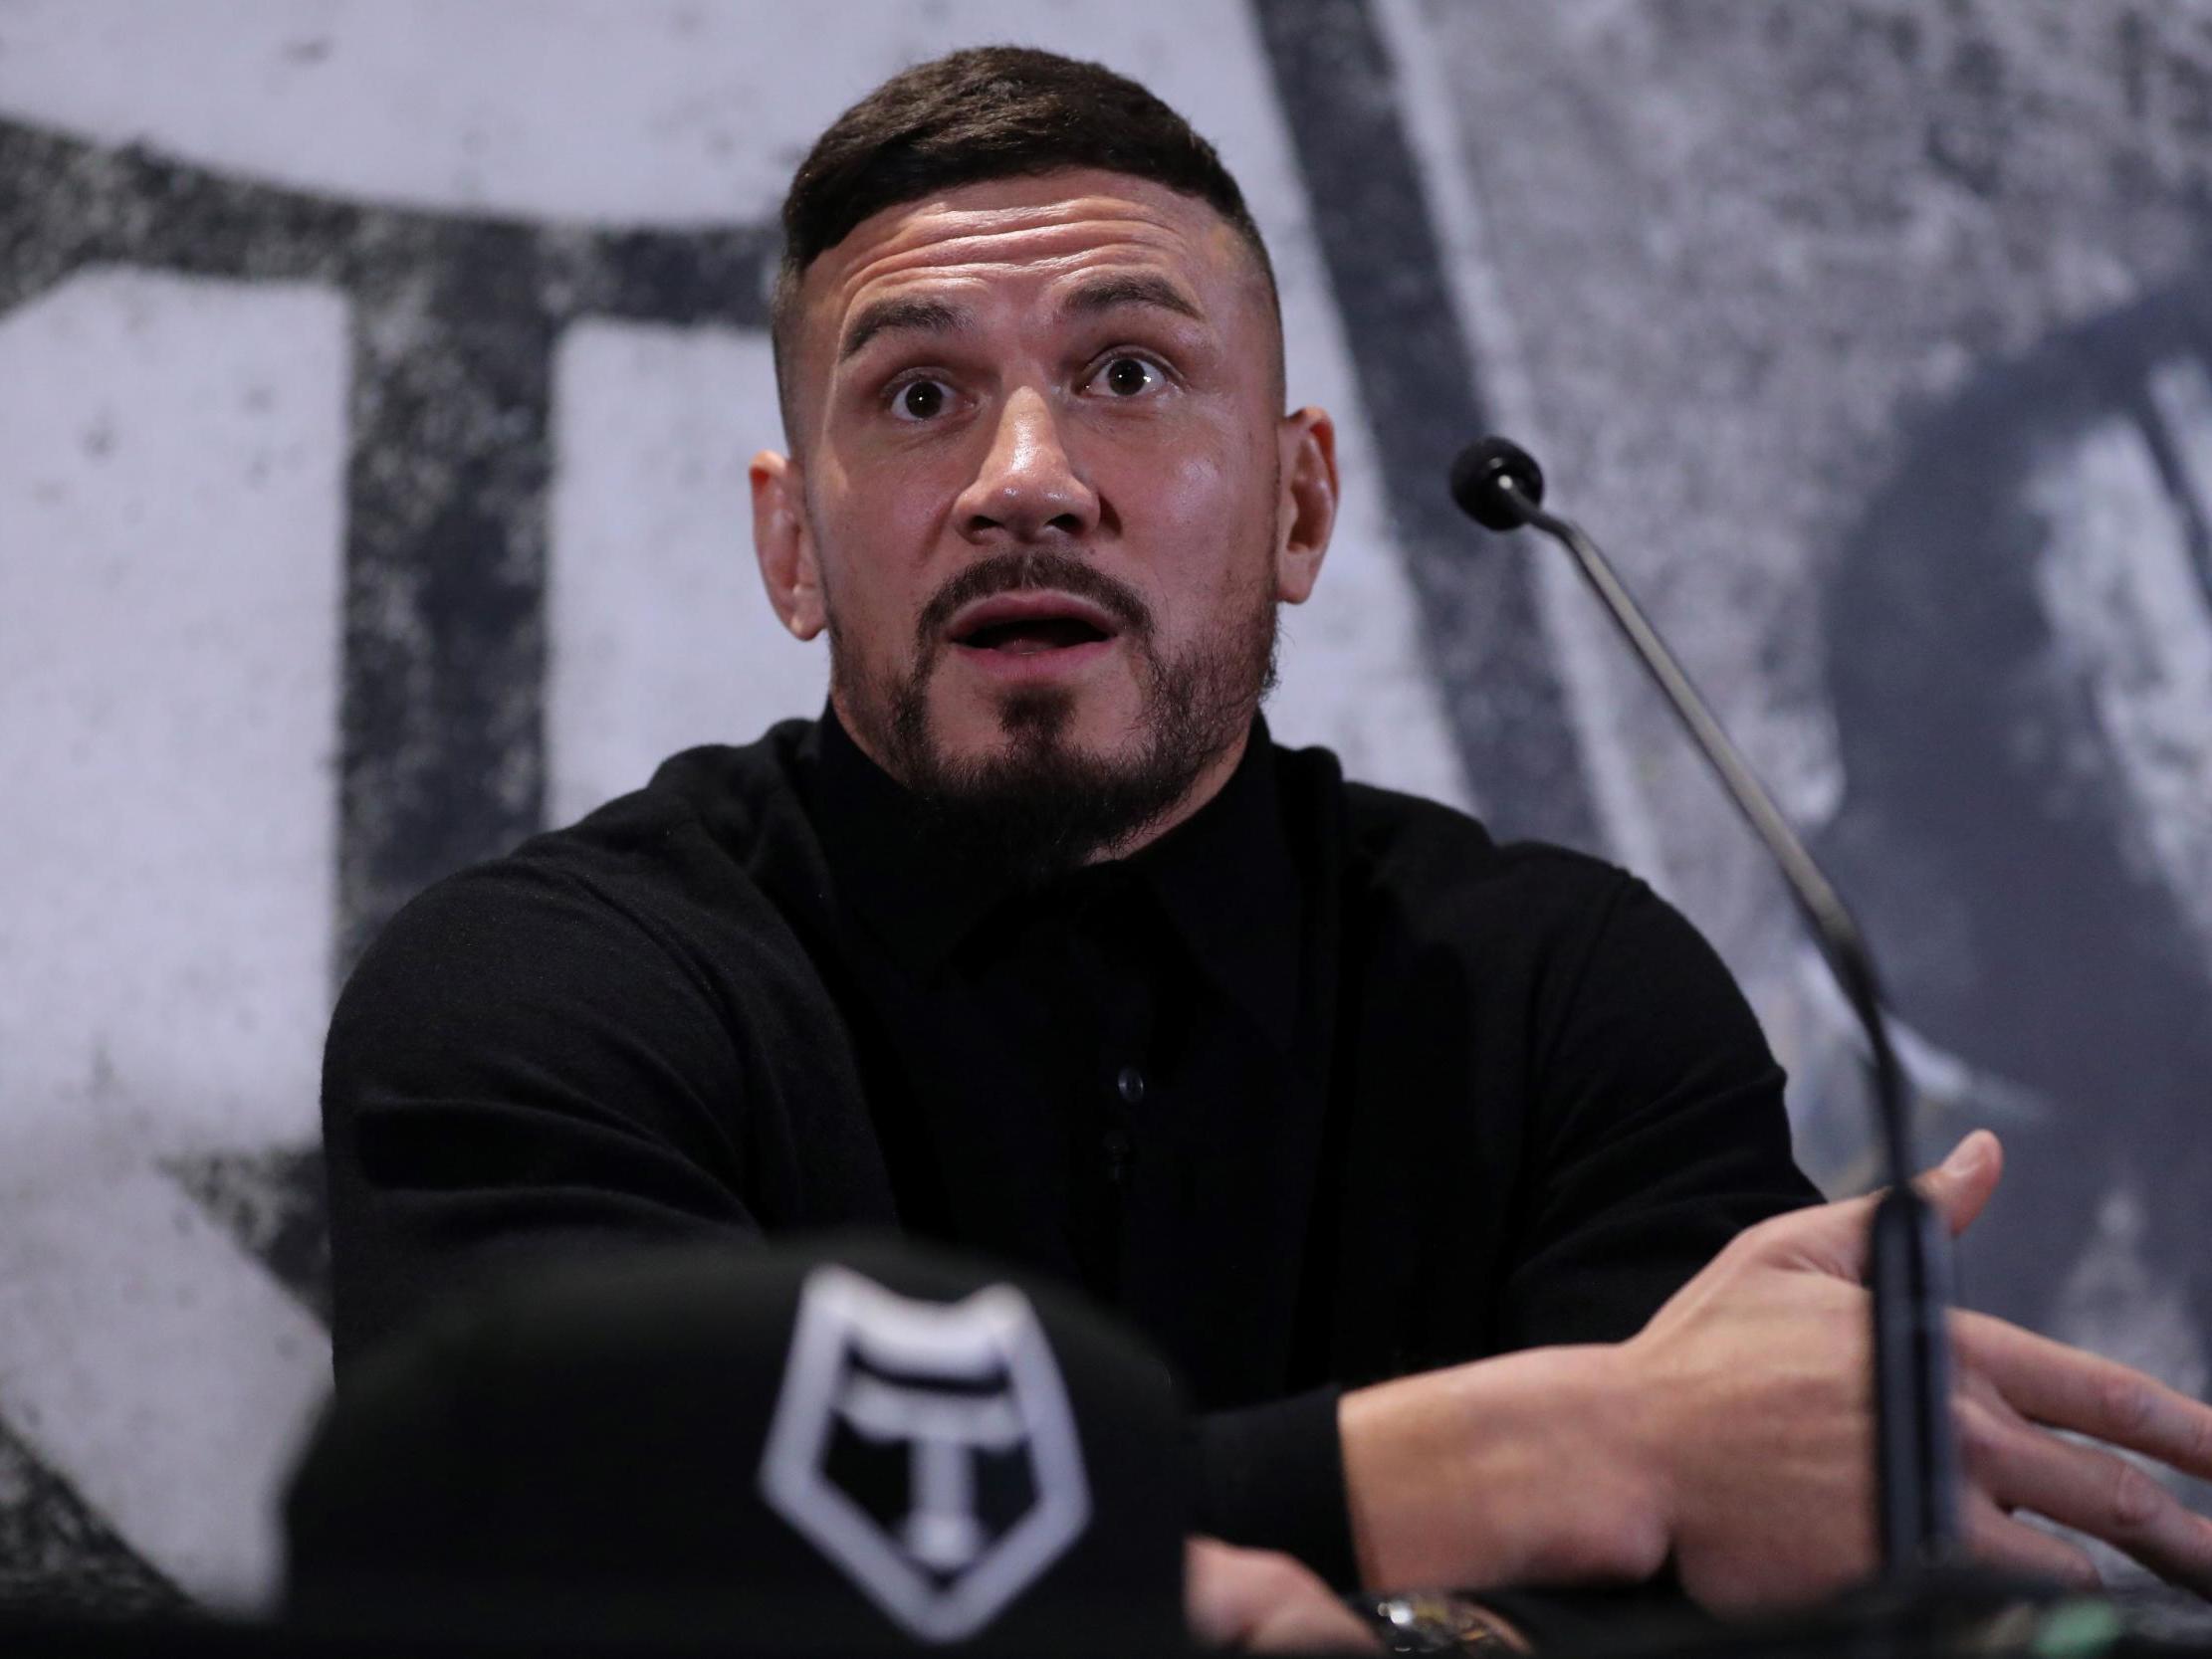 Sonny Bill Williams is more focused on his role in the team